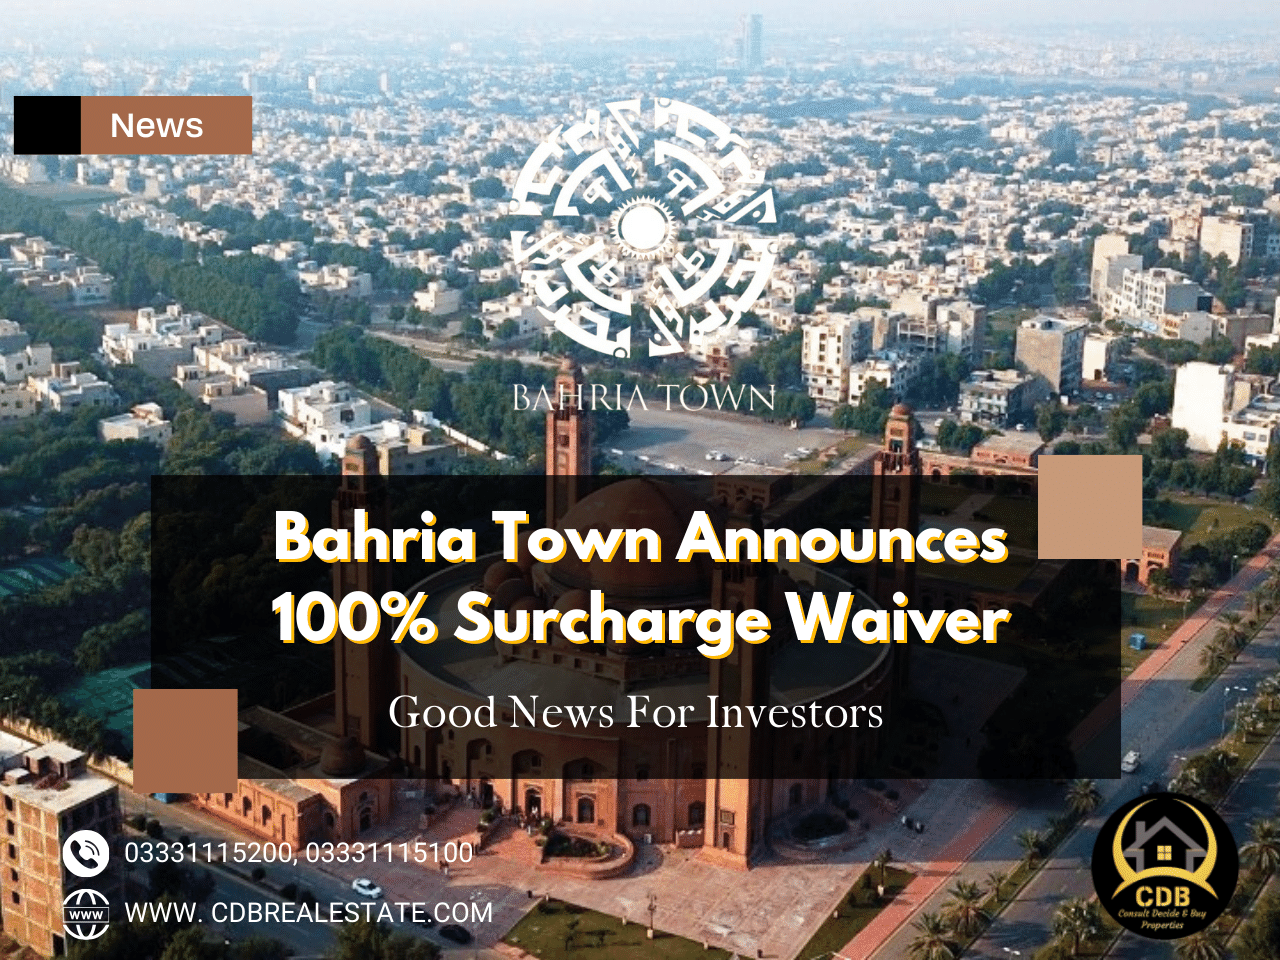 Bahria Town Surcharge Waiver